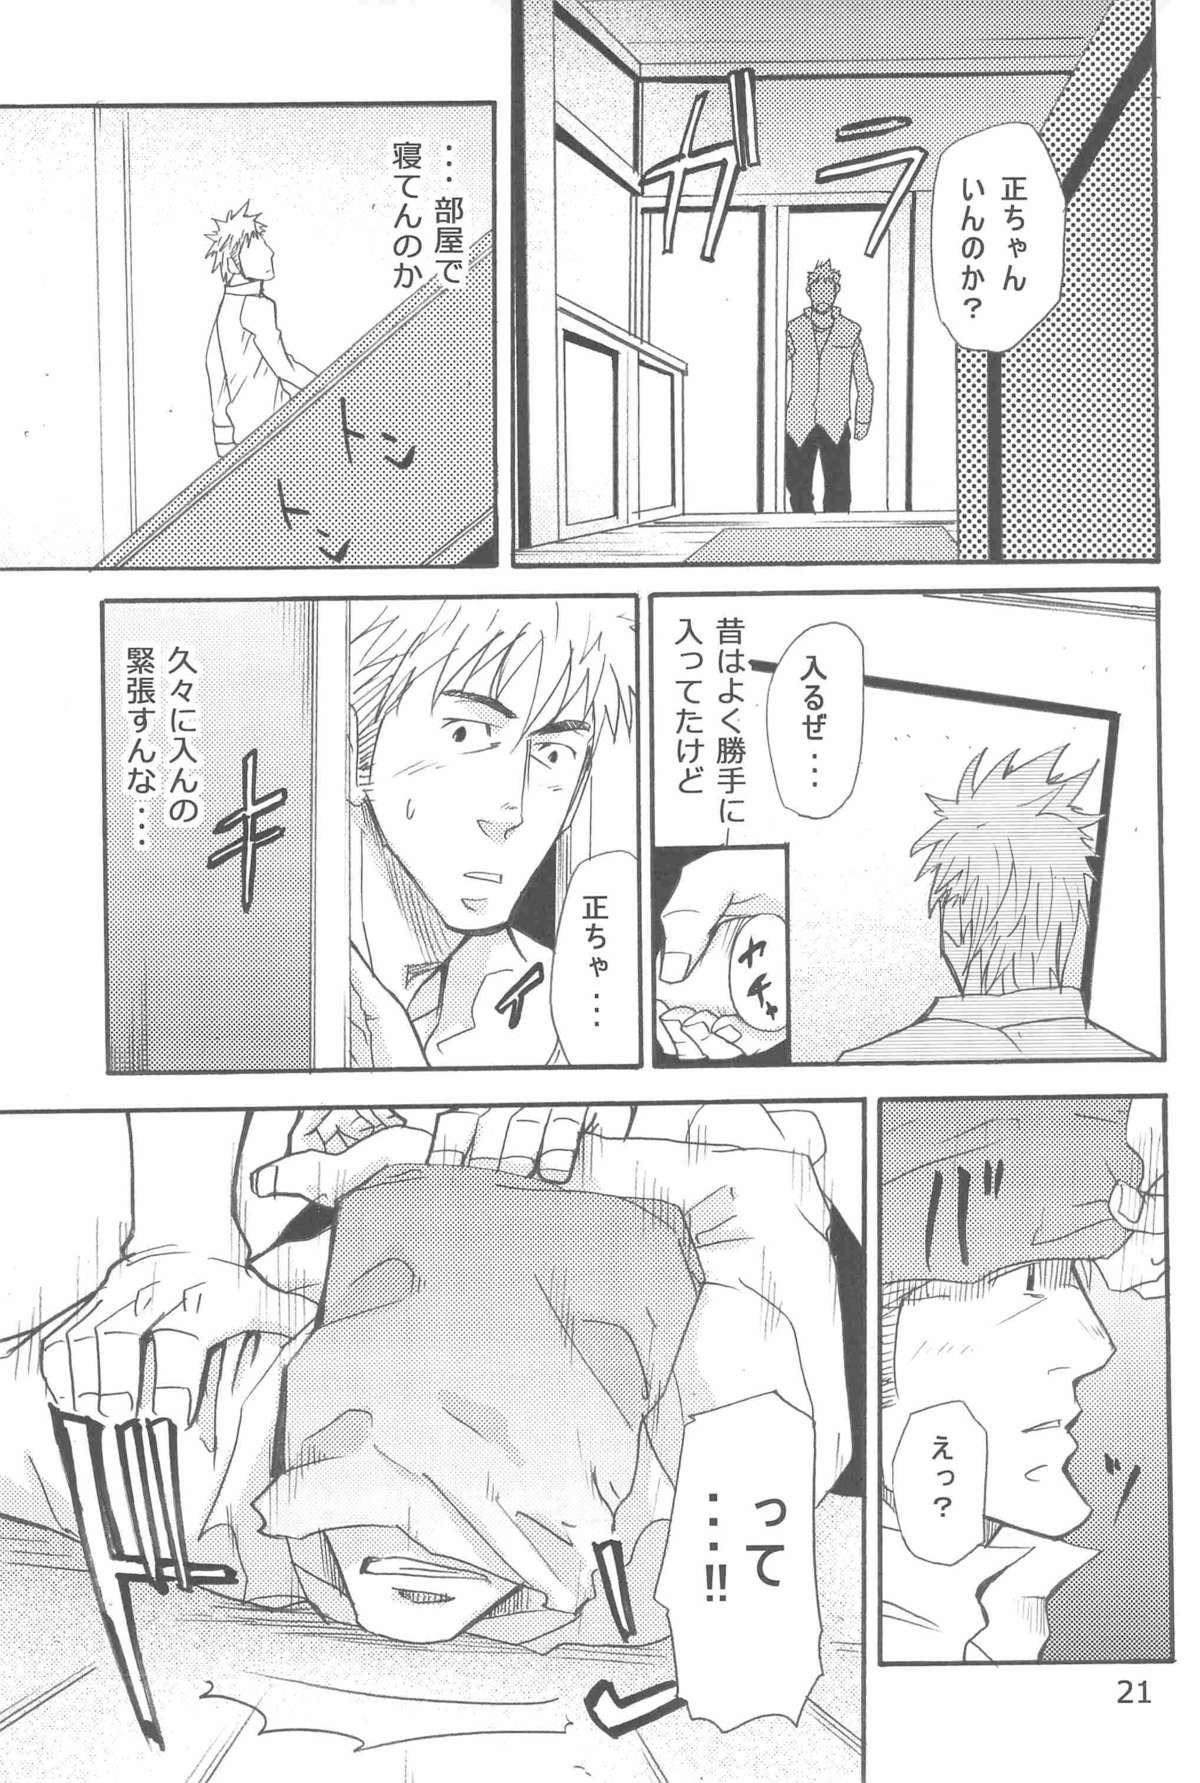 [MATSU Takeshi] More and More of You 5 page 3 full